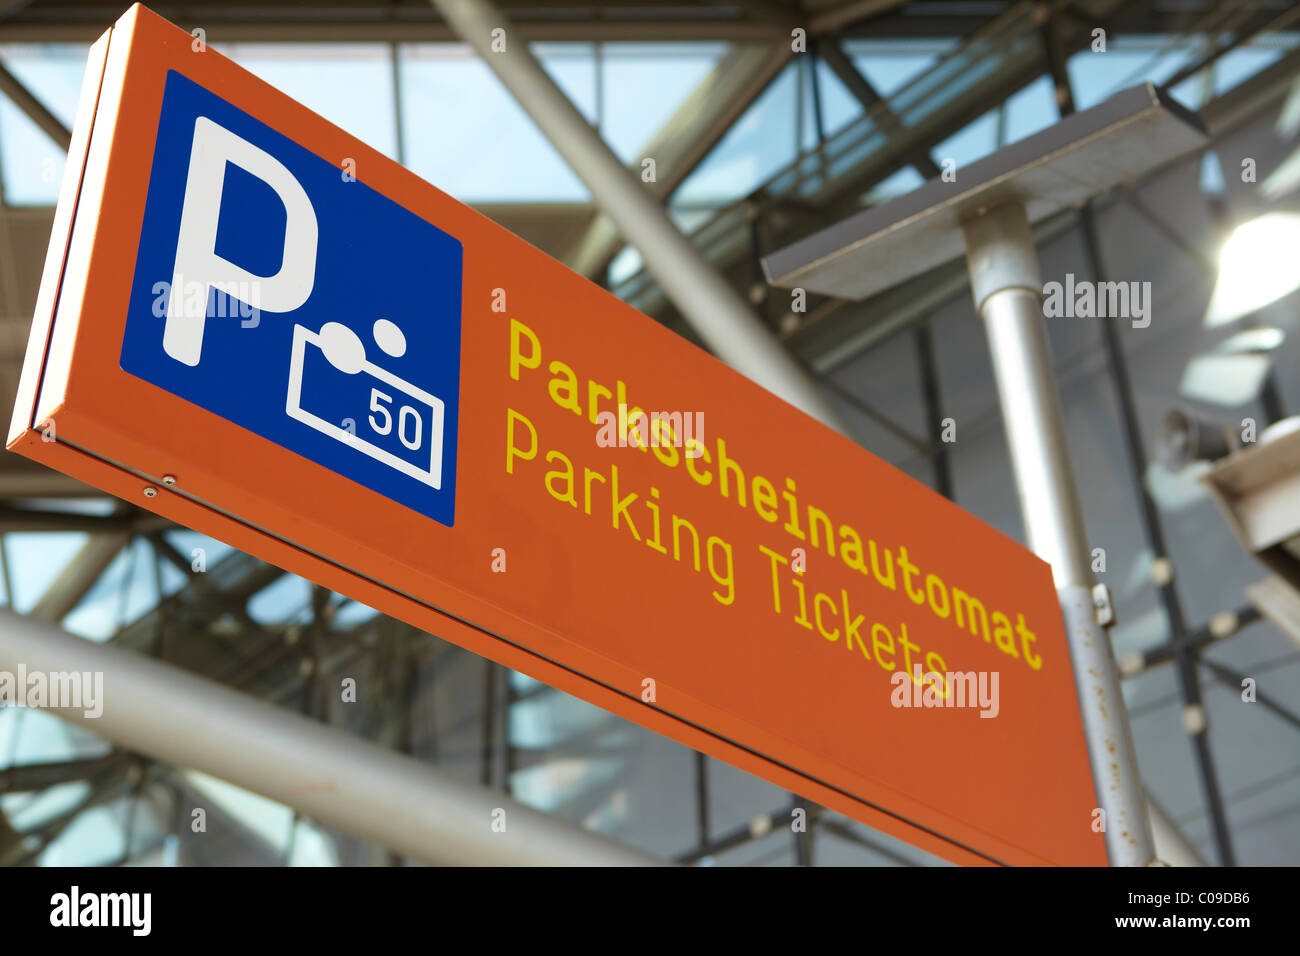 Sign Parkscheinautomat, parking meter, pay and display machine Stock Photo